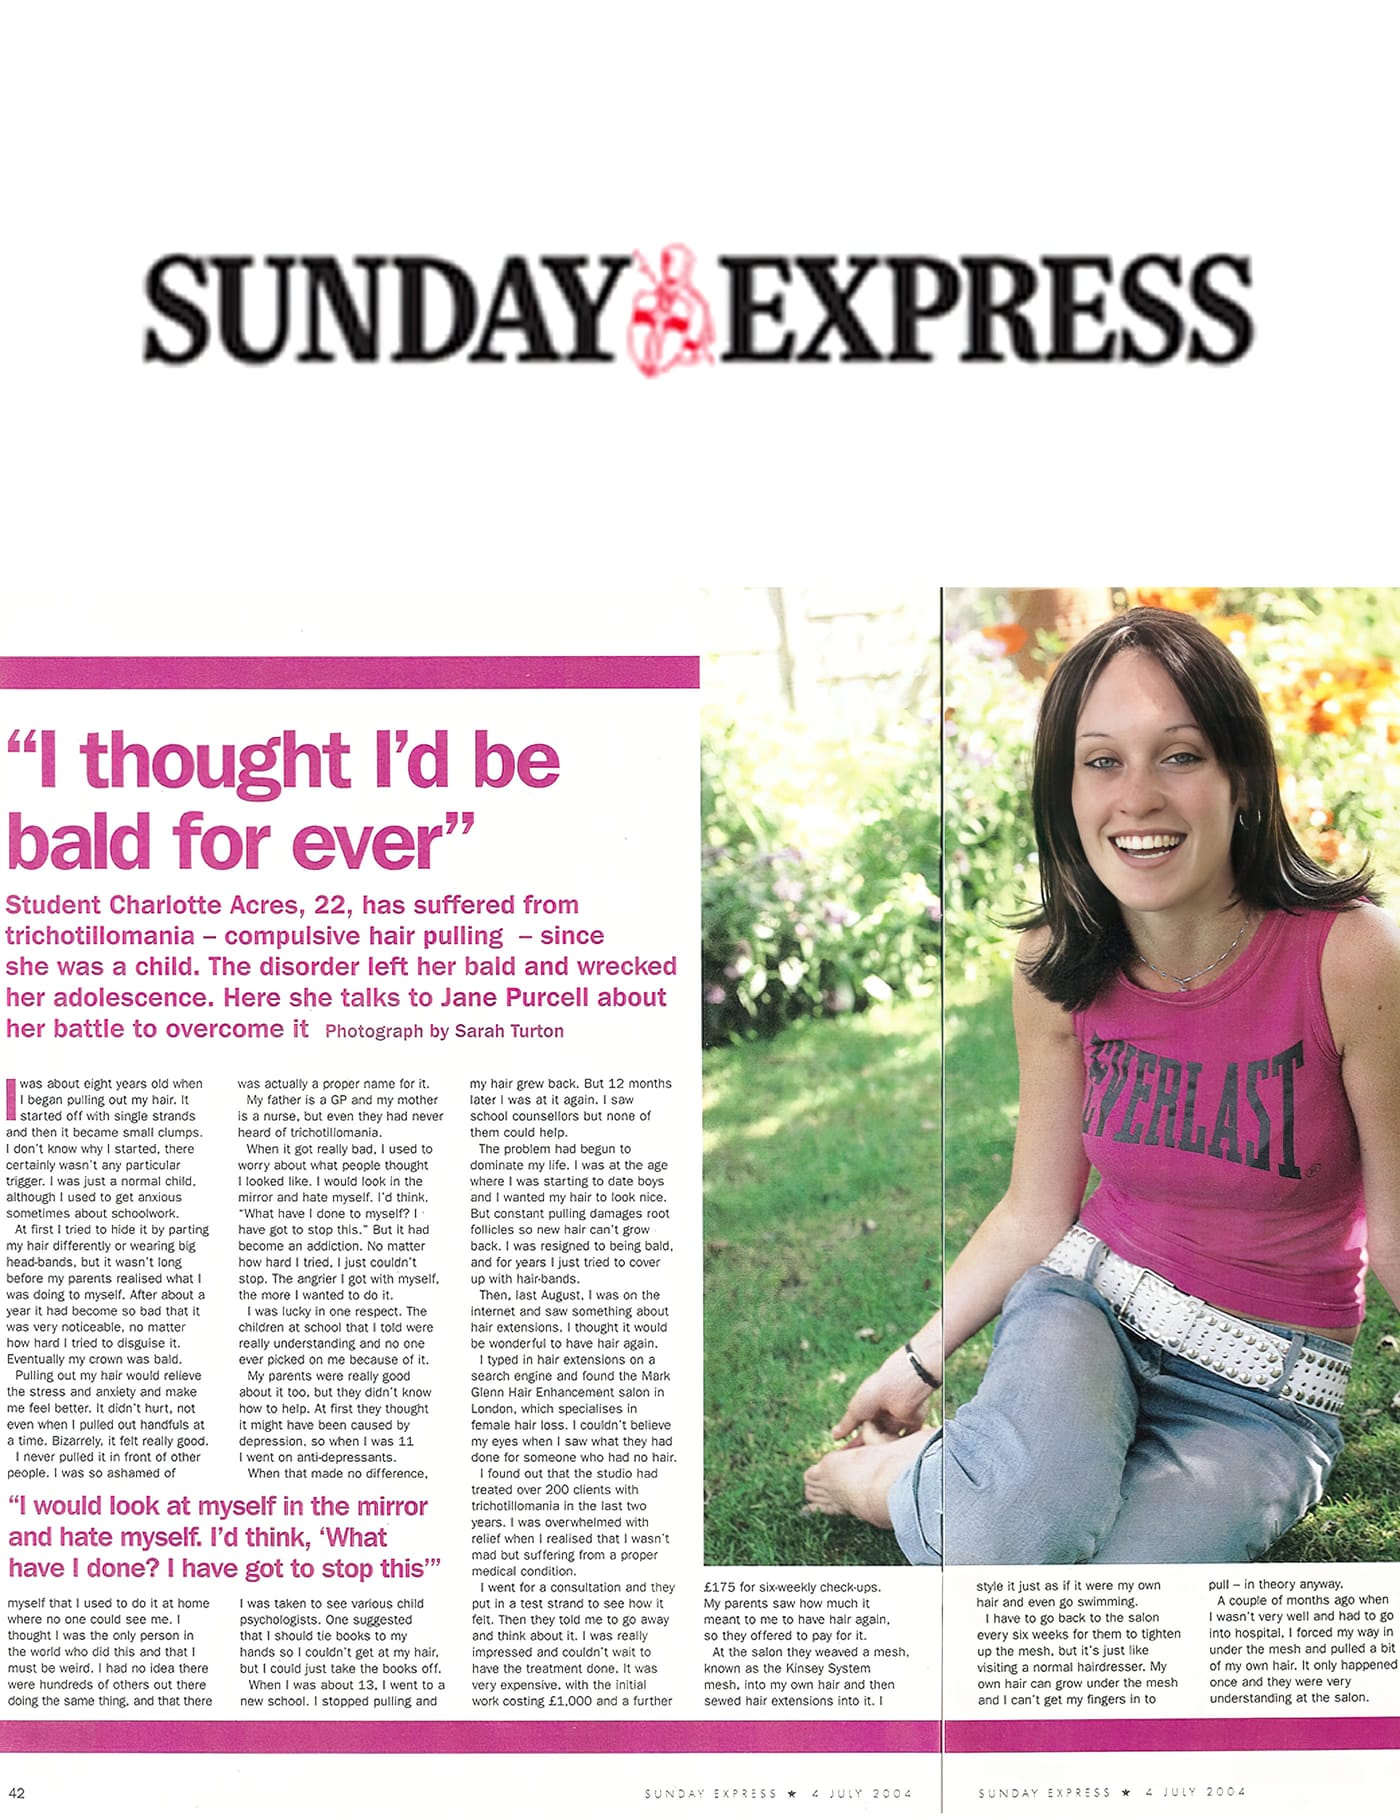 'I thought I'd be bald forever' - Trichotillomania solution from Mark Glenn in The Sunday Express